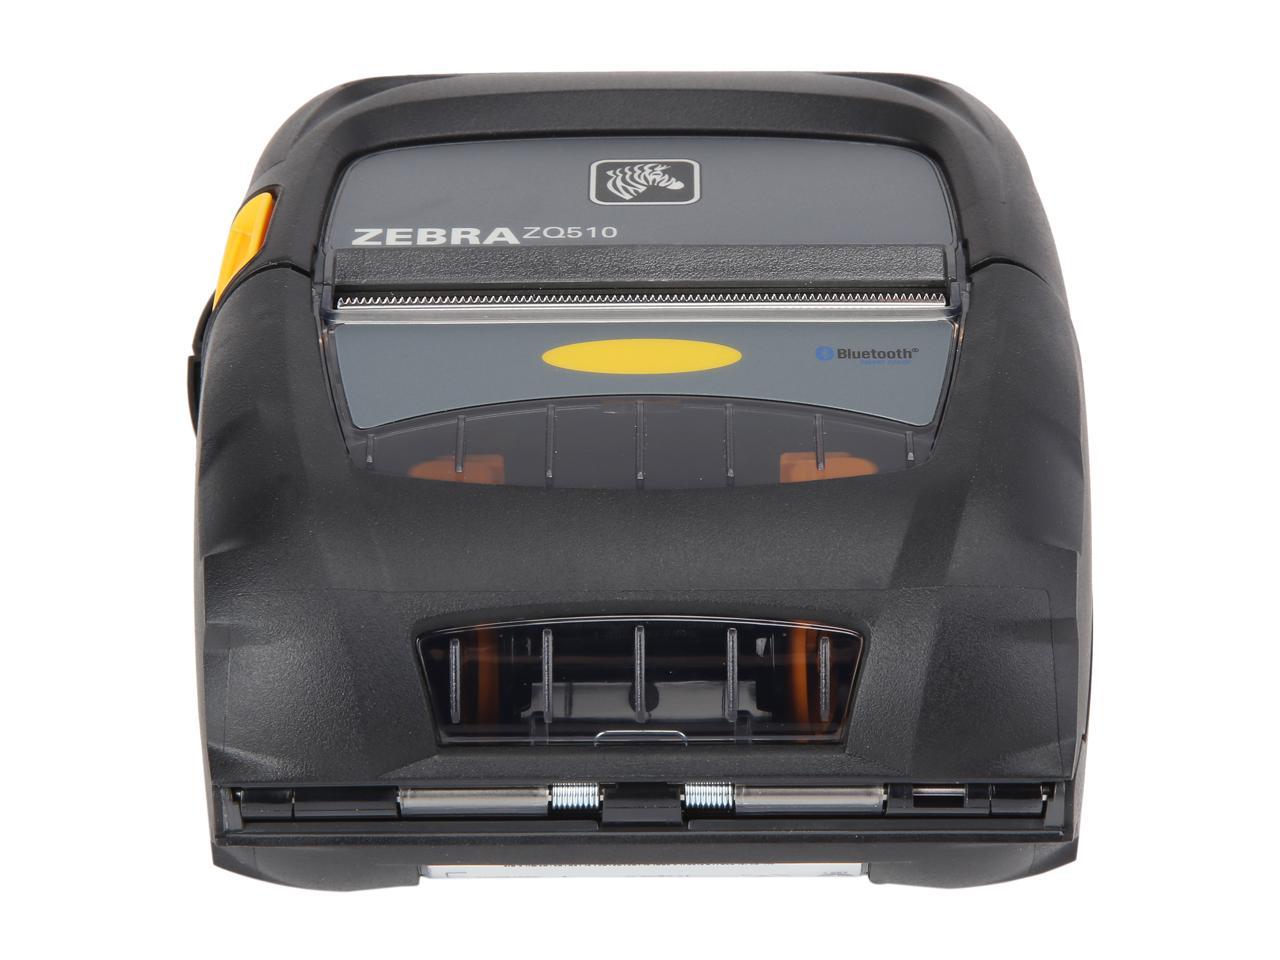 Zebra Zq510 3 Mobile Direct Thermal Receipt And Label Printer 203 Dpi Bluetooth 40 Linered 0743